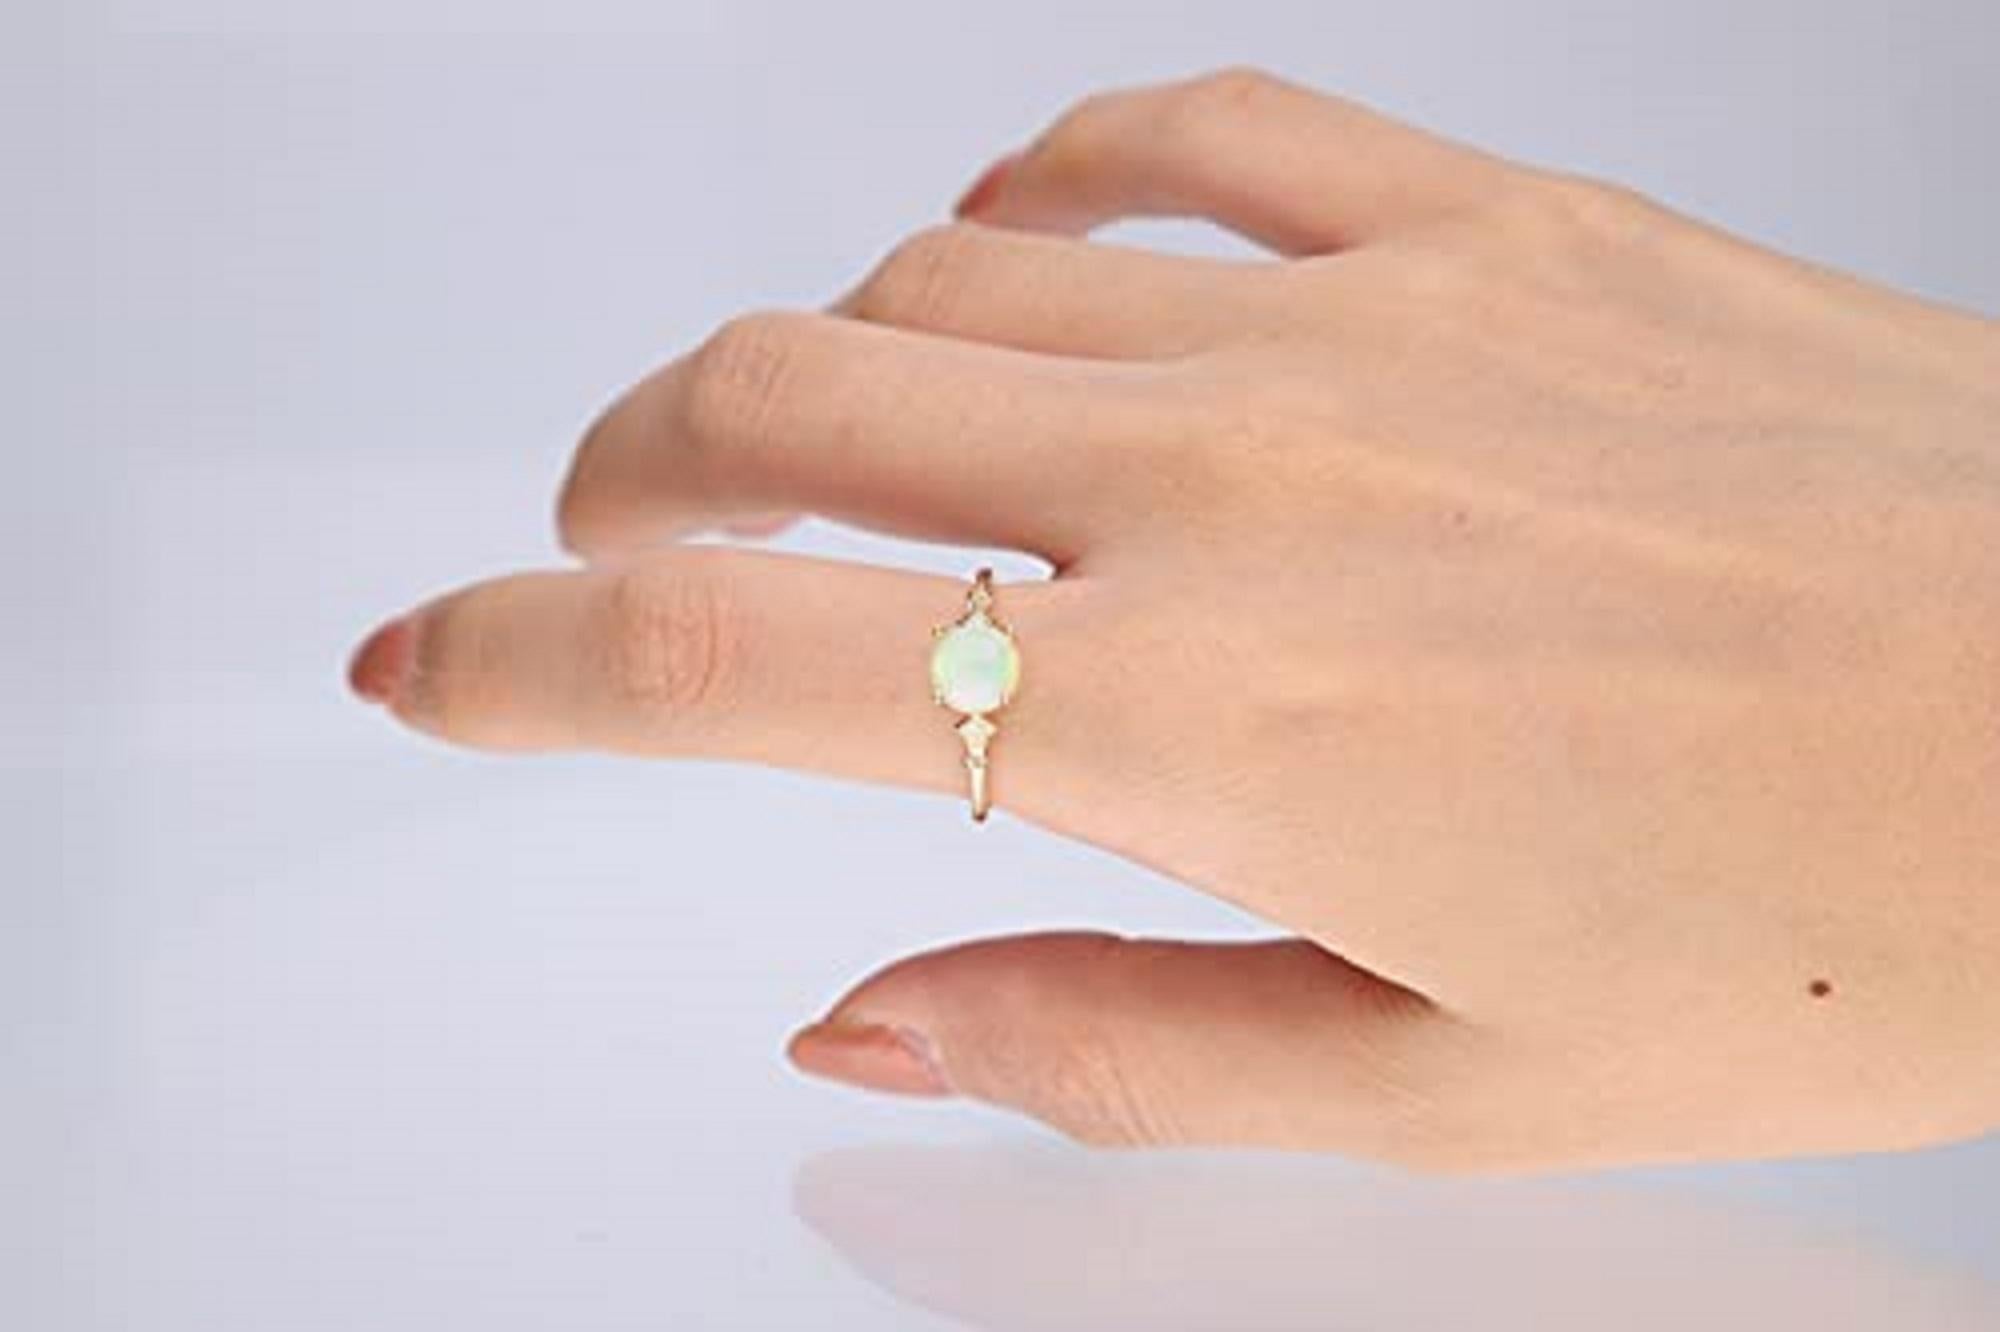 Stunning, timeless and classy eternity Unique ring. Decorate yourself in luxury with this Gin & Grace ring. This ring is made up of 7MM Round-cut Prong Setting Ethiopian Opal (1pcs) 1.11 Carat and Round-Cut Prong Setting Diamond (2pcs) 0.04 Carat